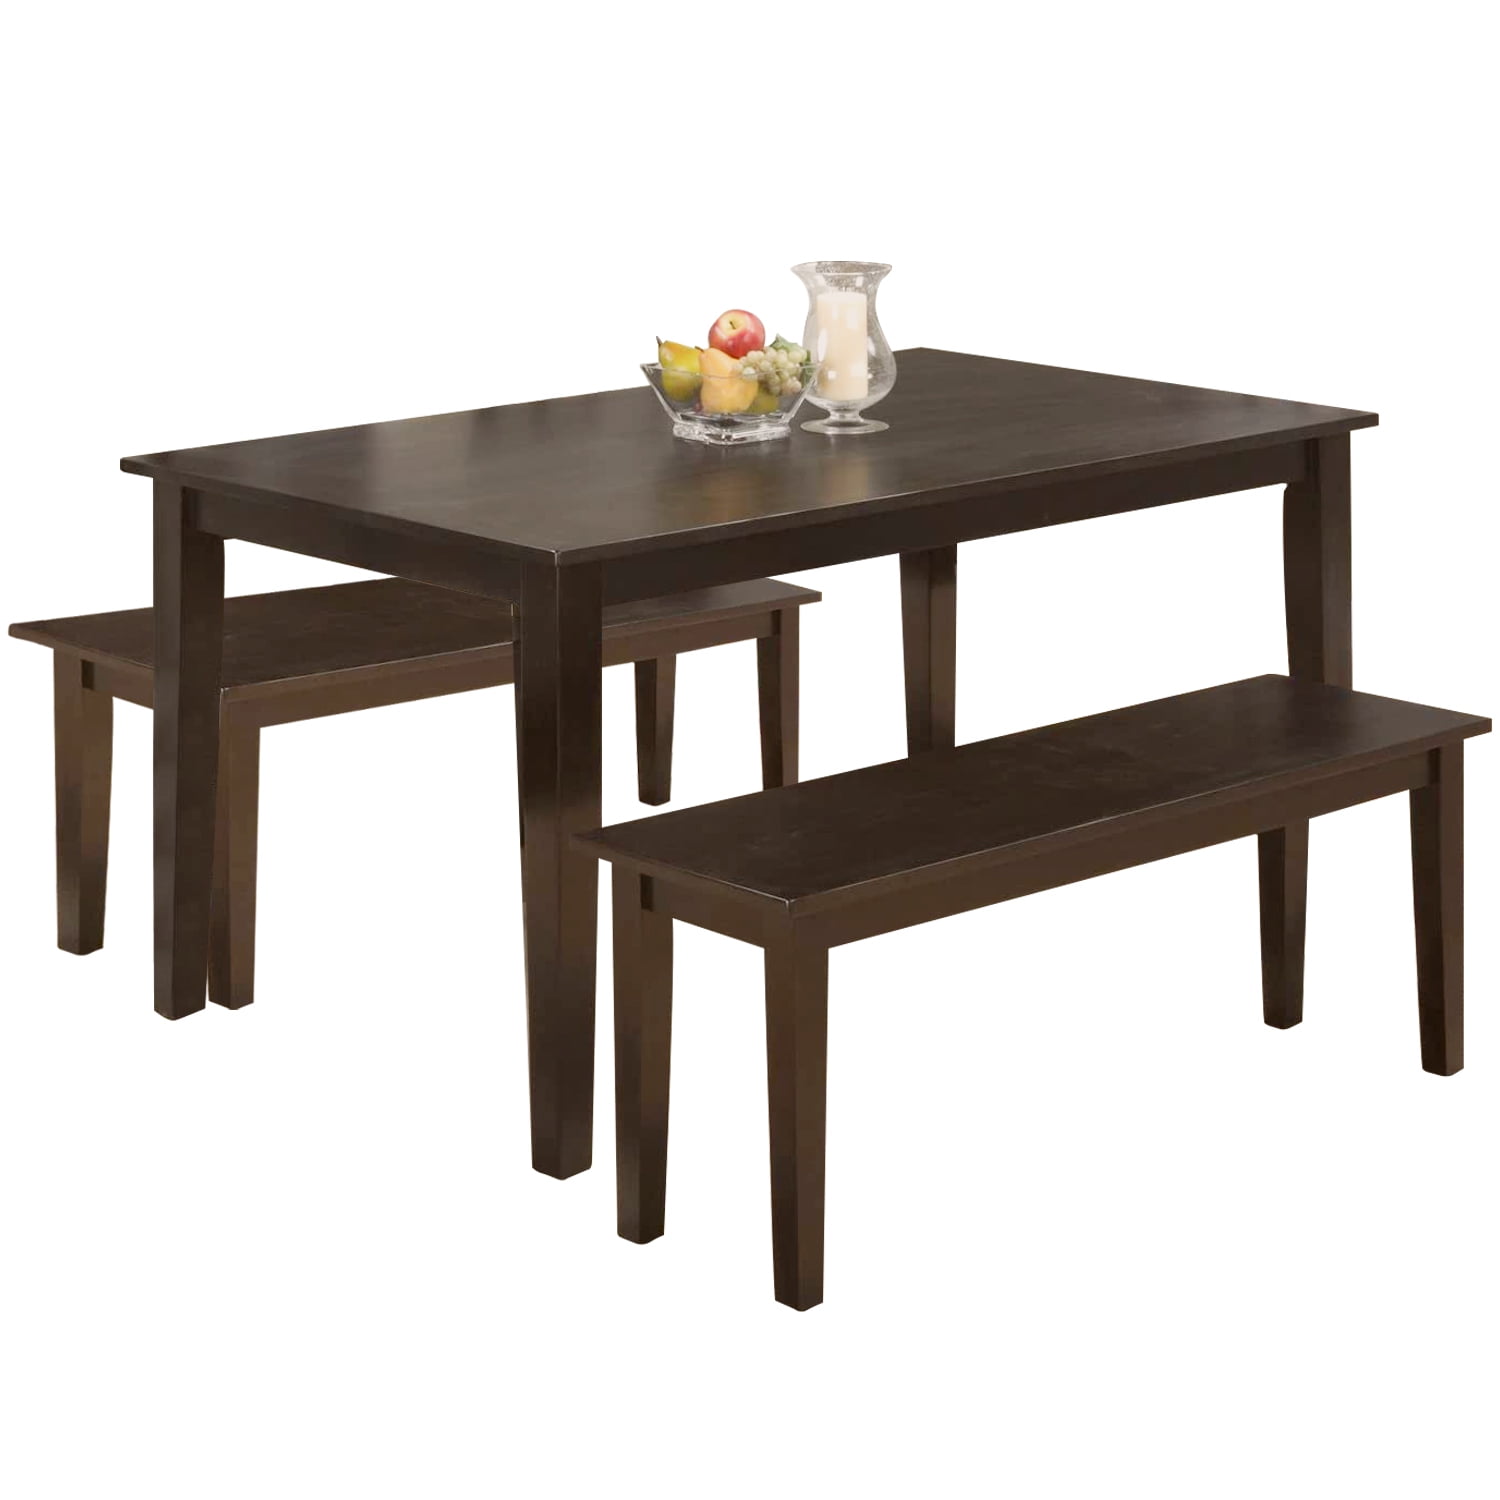 Fdw Dining Table Set And Bench For 4, Dining Room Set With 4 Chairs And Bench